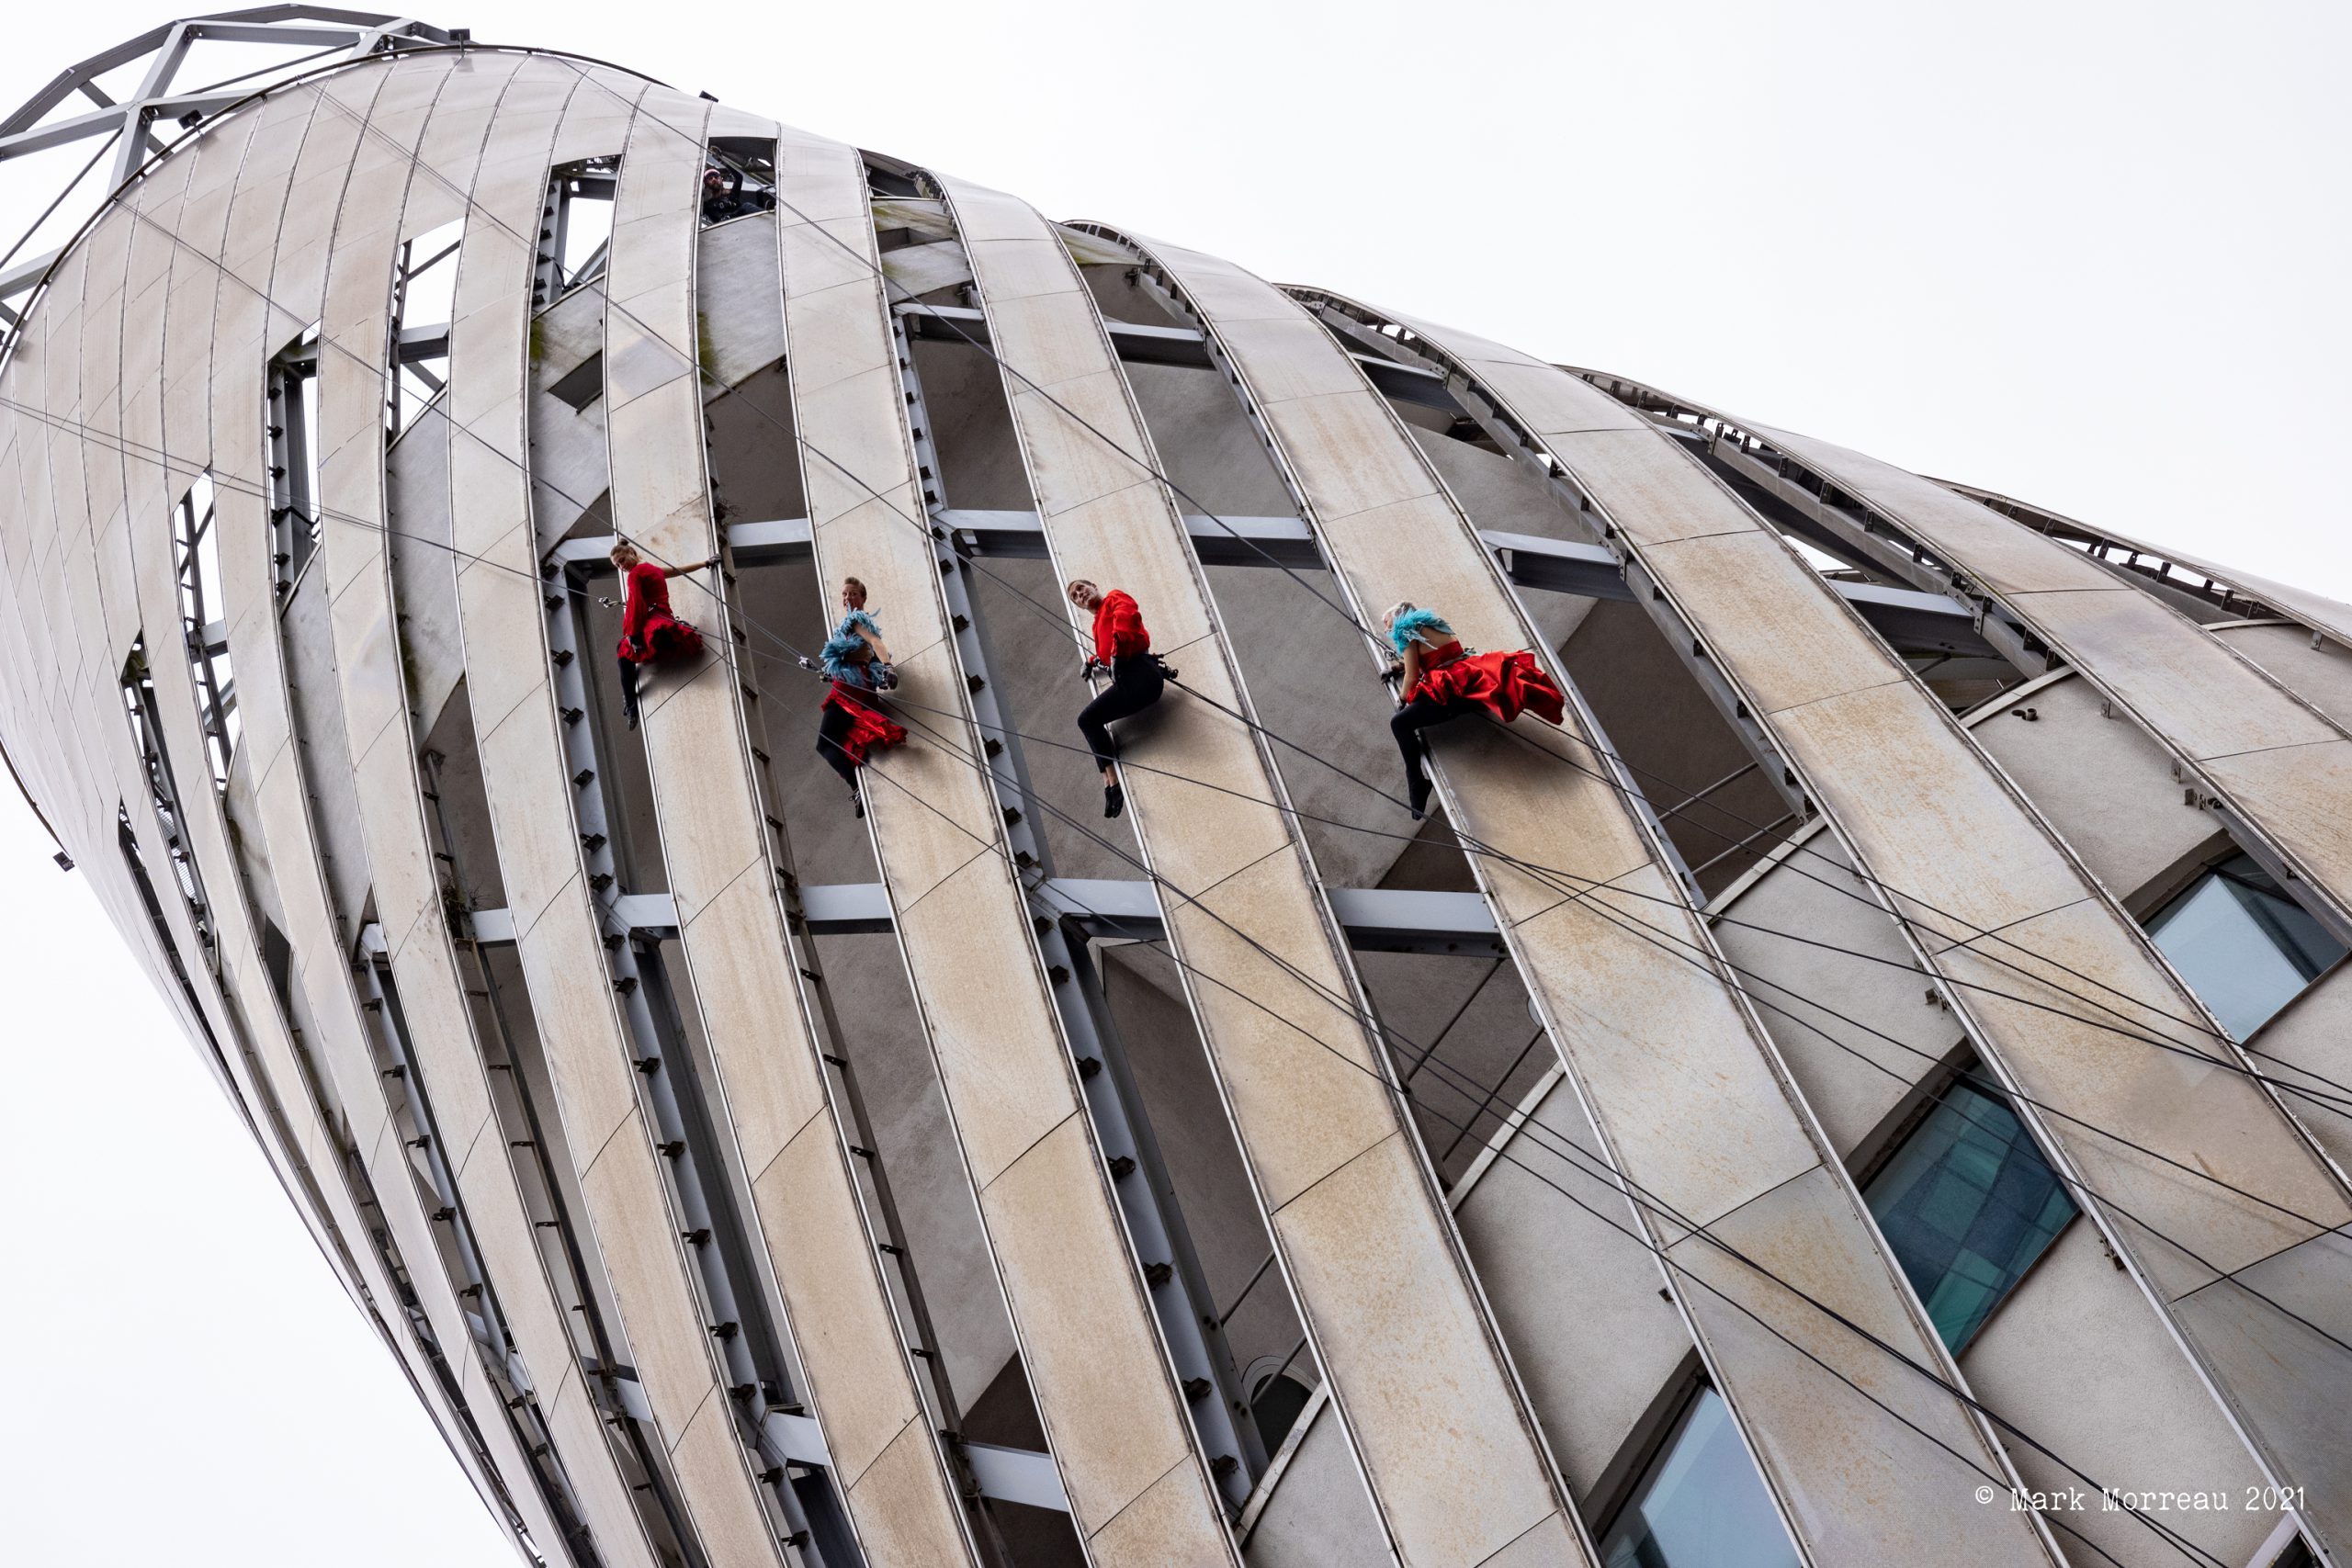 Four aerial performers in red costumes suspended on the side of The Lowry building.